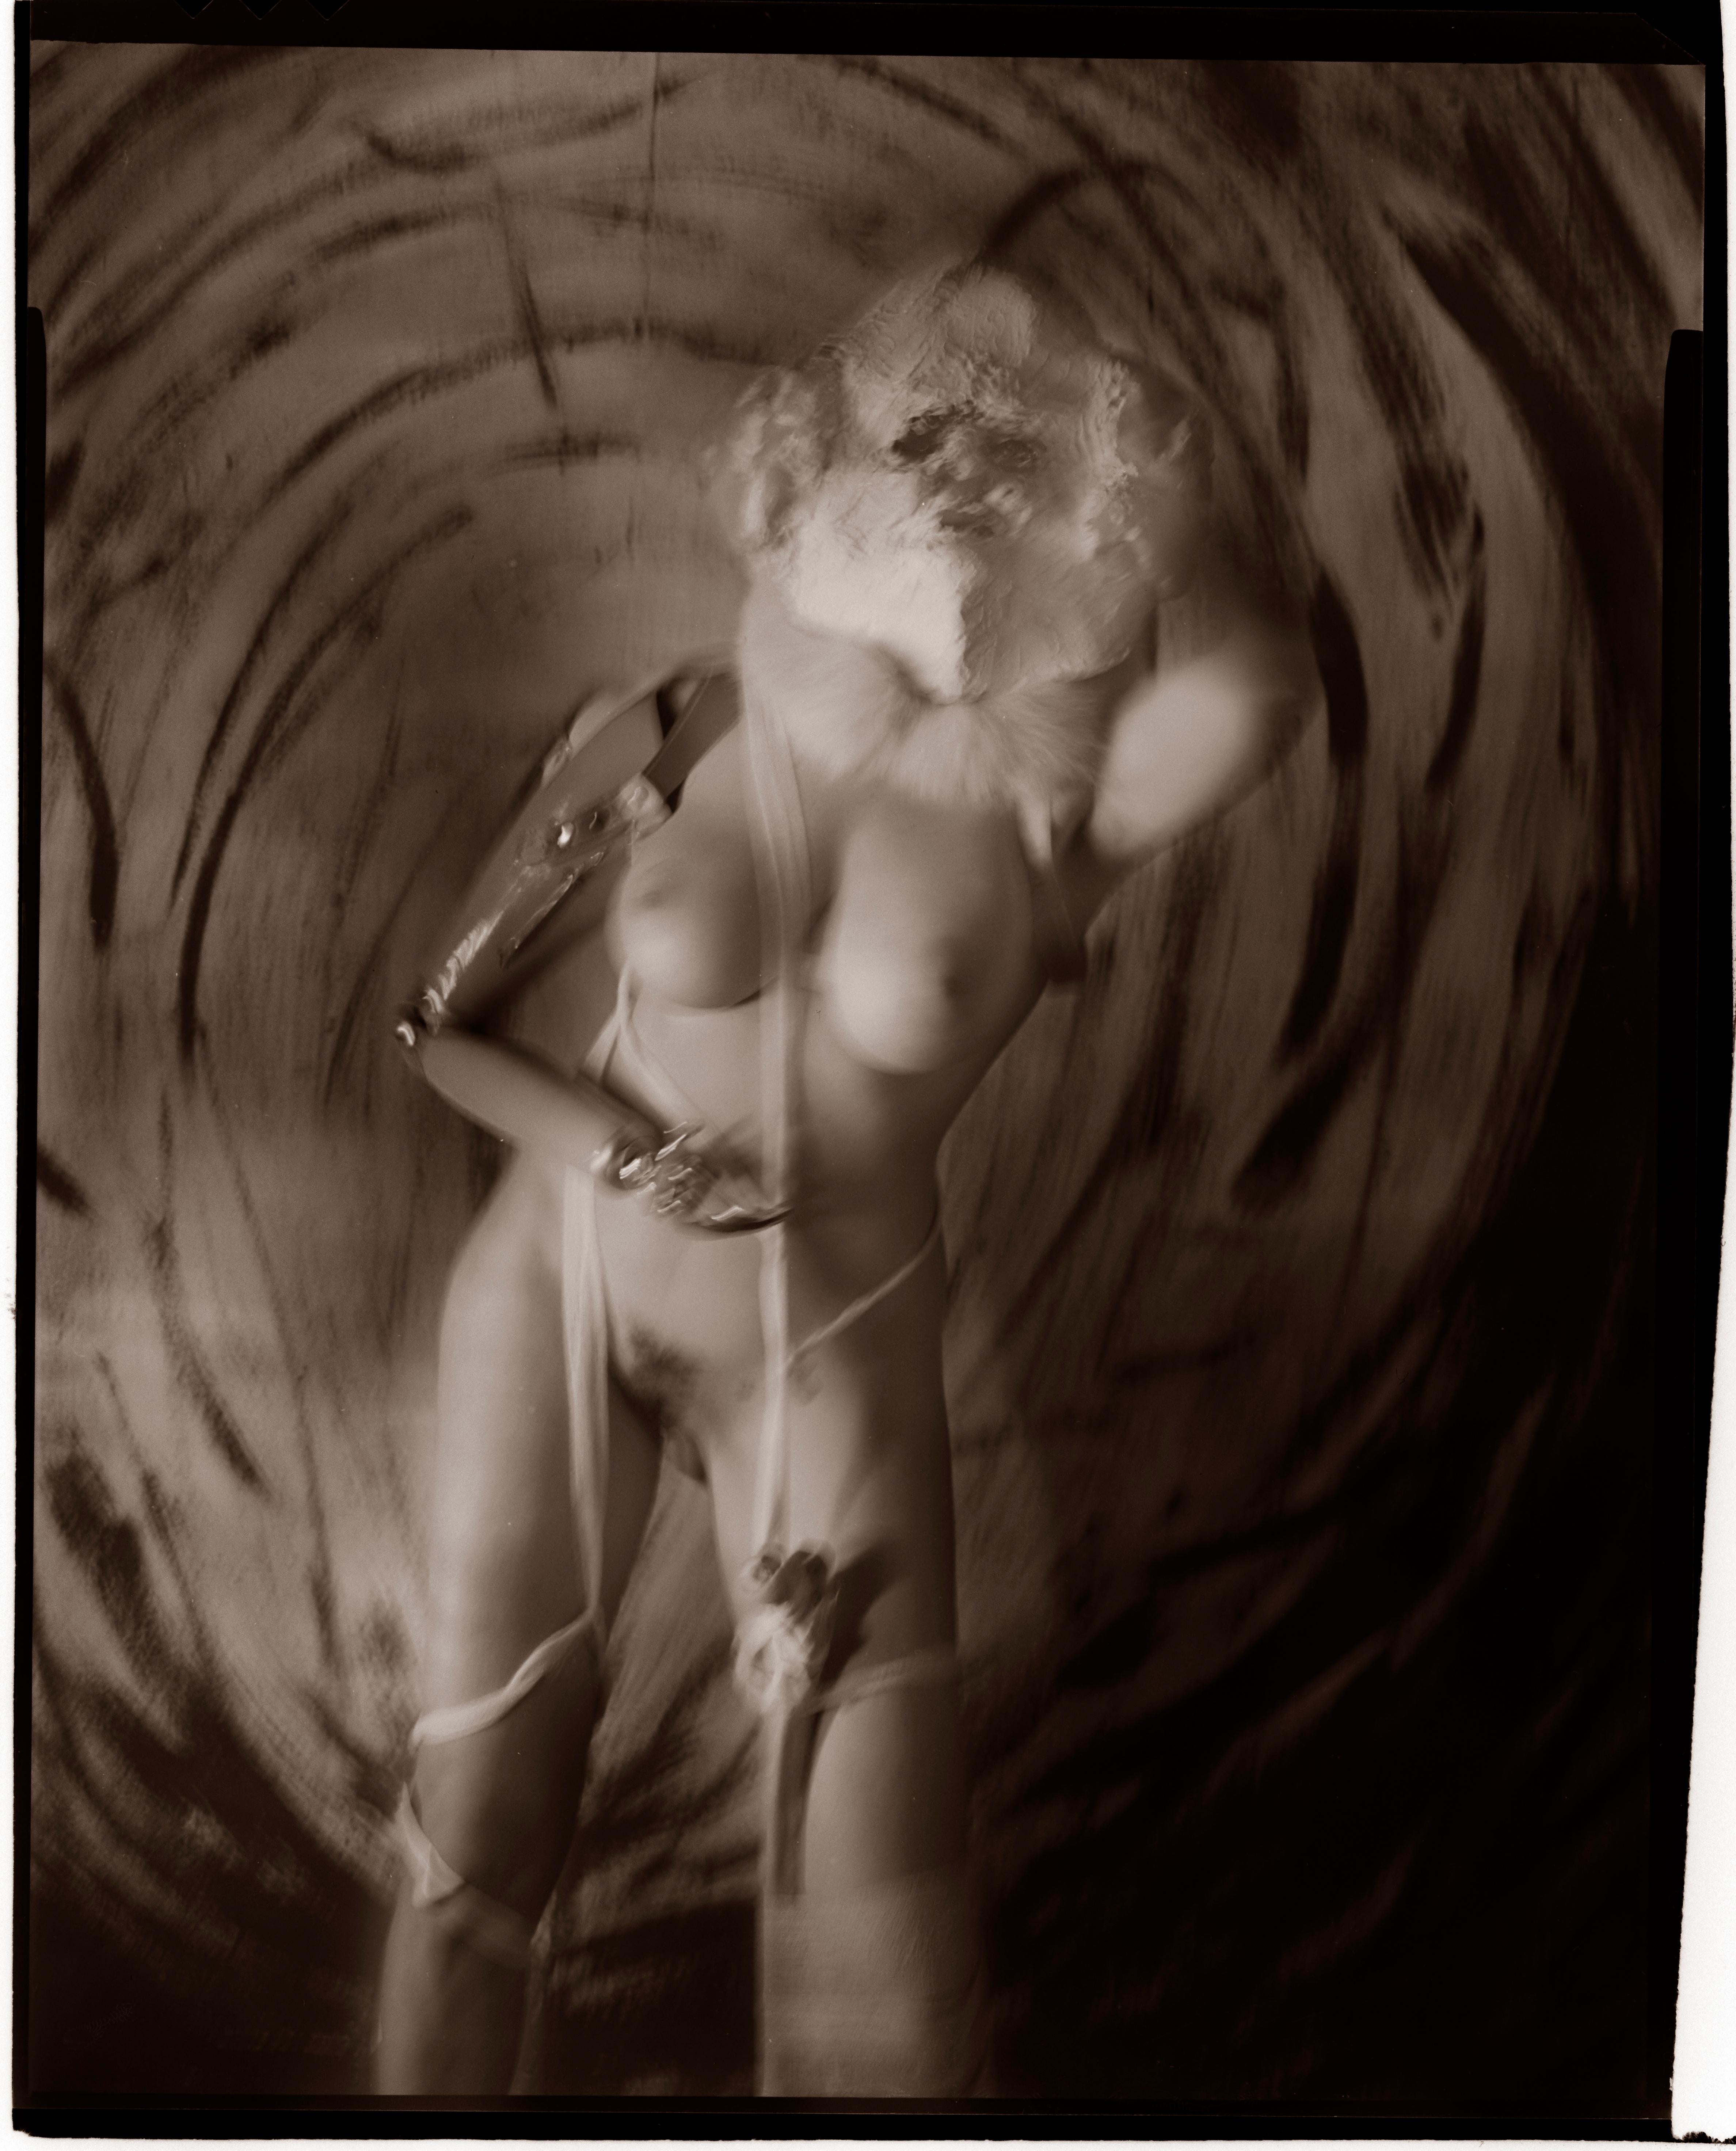 
PAUL TILLINGHAST
Black and White Nude Gramercy Park 
Edition #1 / 25
Gallery framed acid free and lignin free
Frame 24 x 30 inches 
Print 11 x14 Inches
Archival Pigment Print
Archival Agfa Brovira W/ Poly Tone

Born in Bristol Connecticut in 1954,